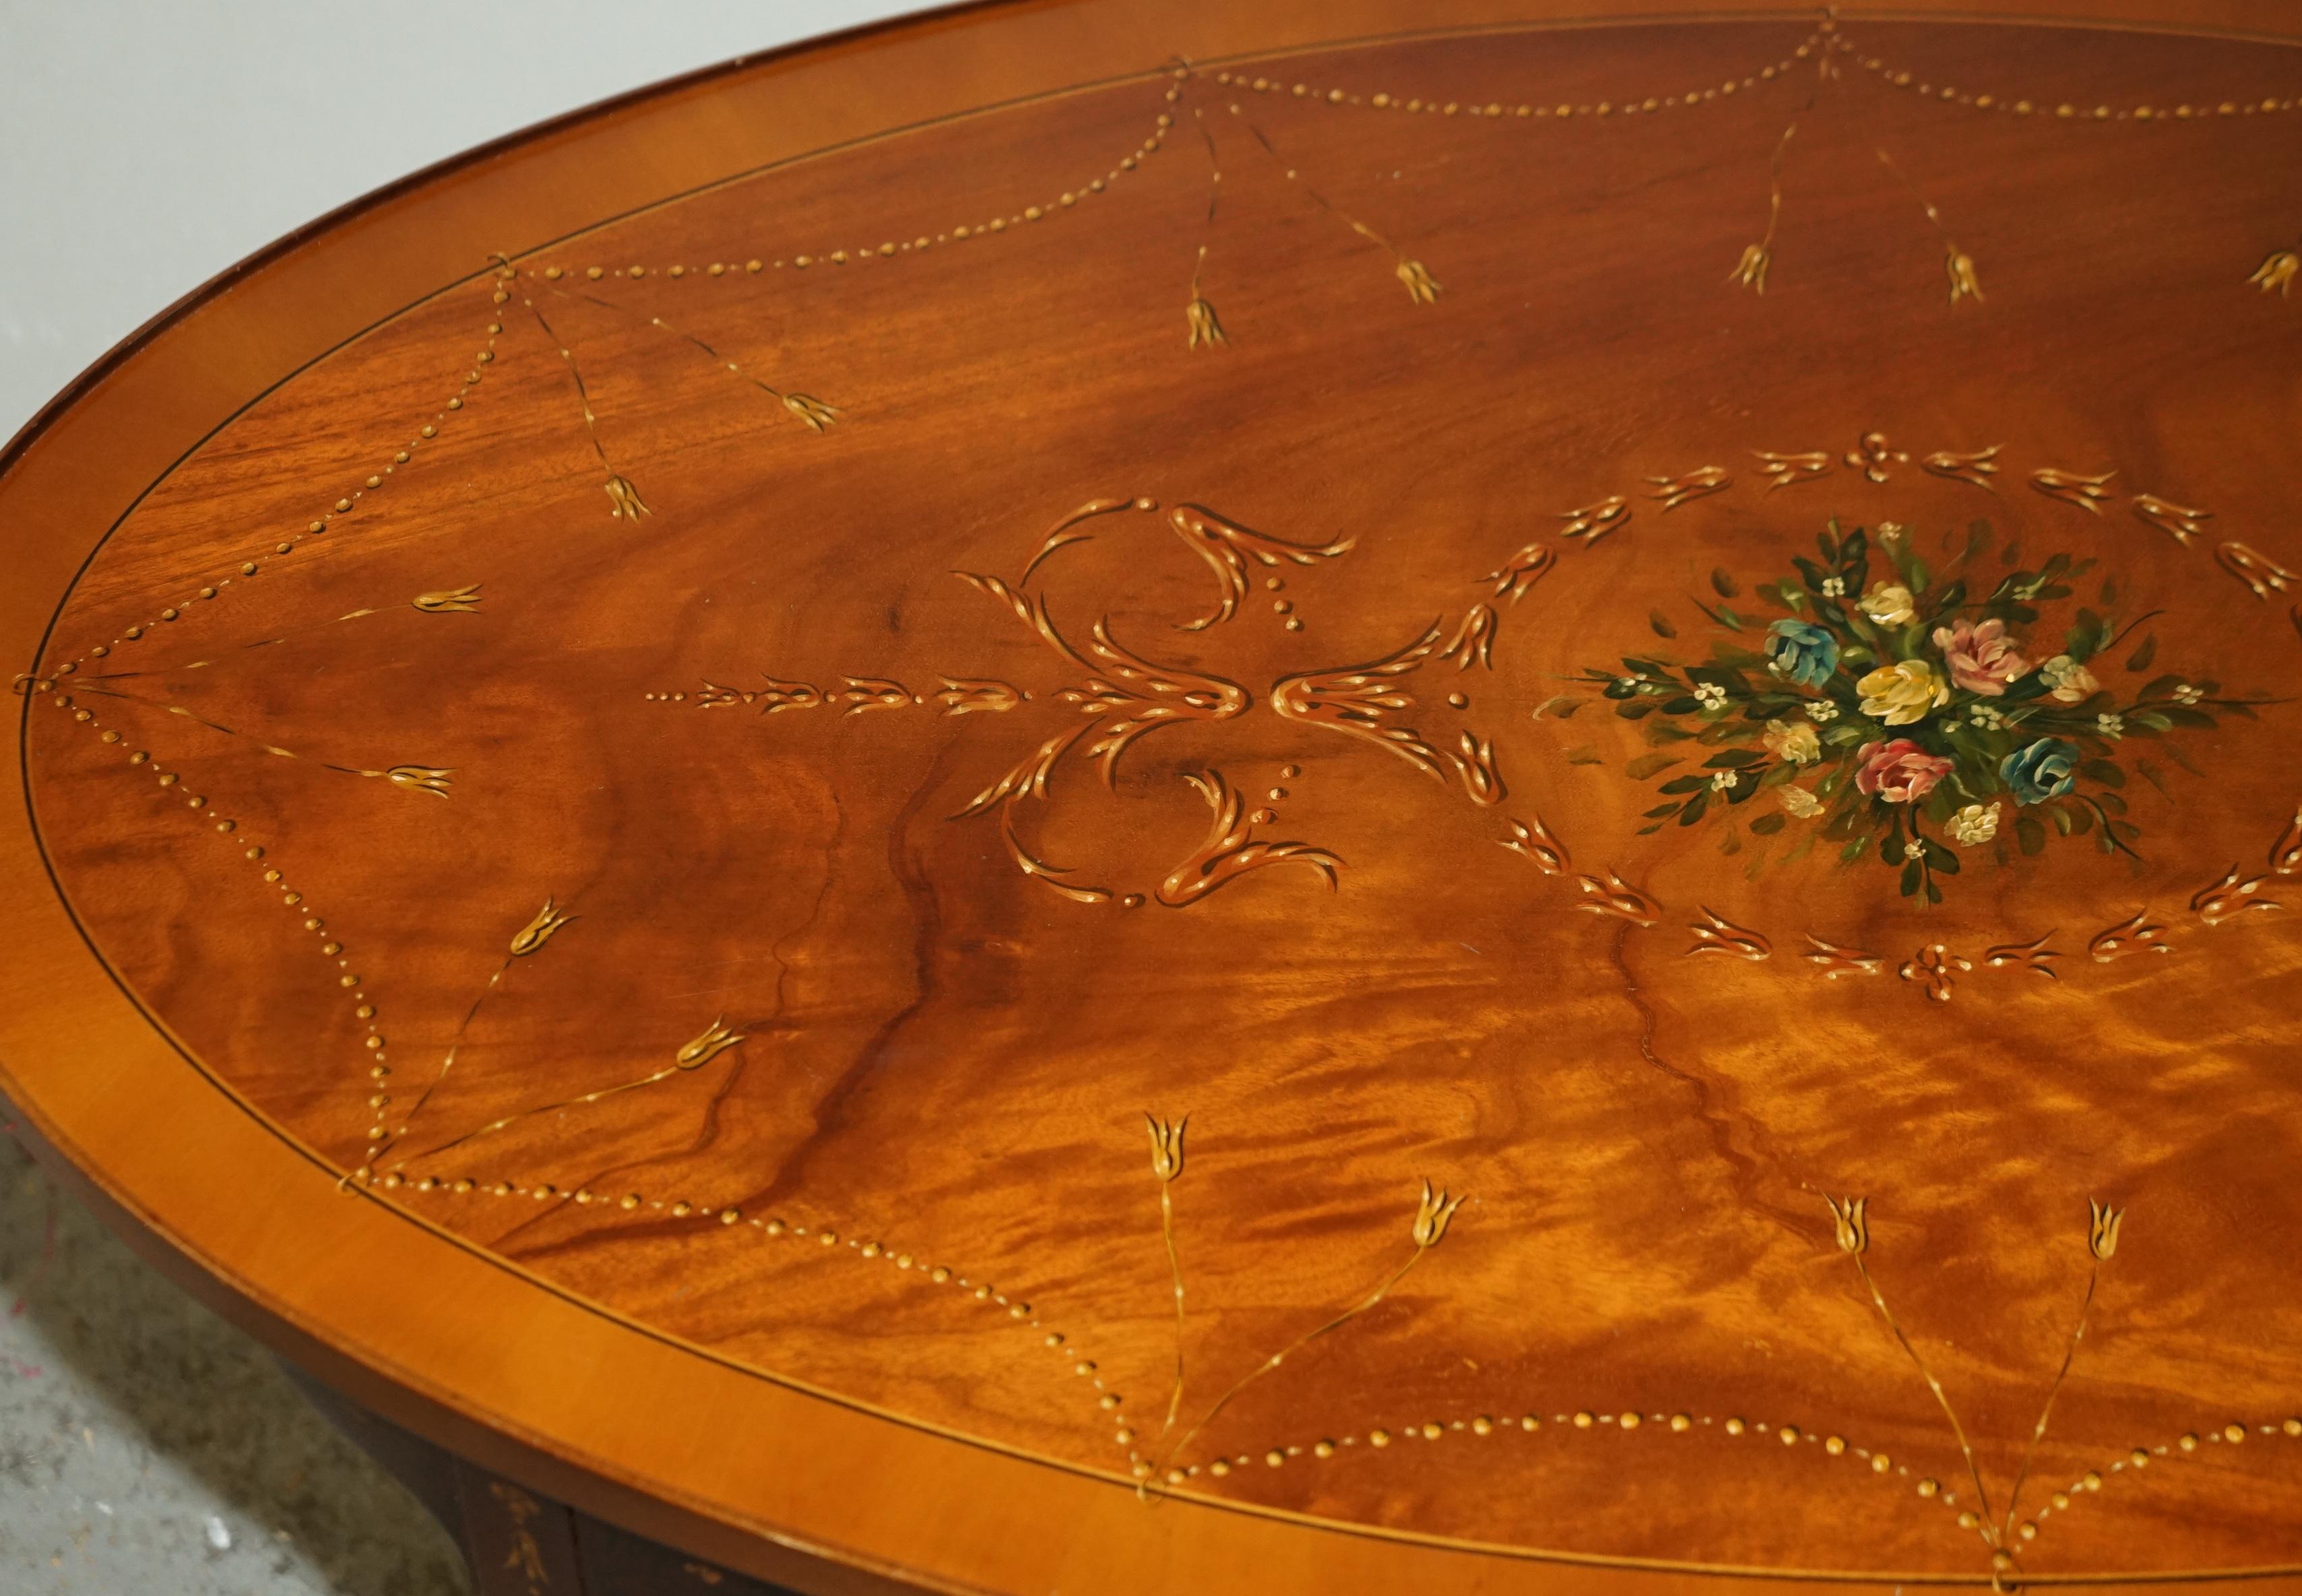 Stunning Oval Hardwood Coffee Table With Splayed Legs Decorative Floral Detail 4